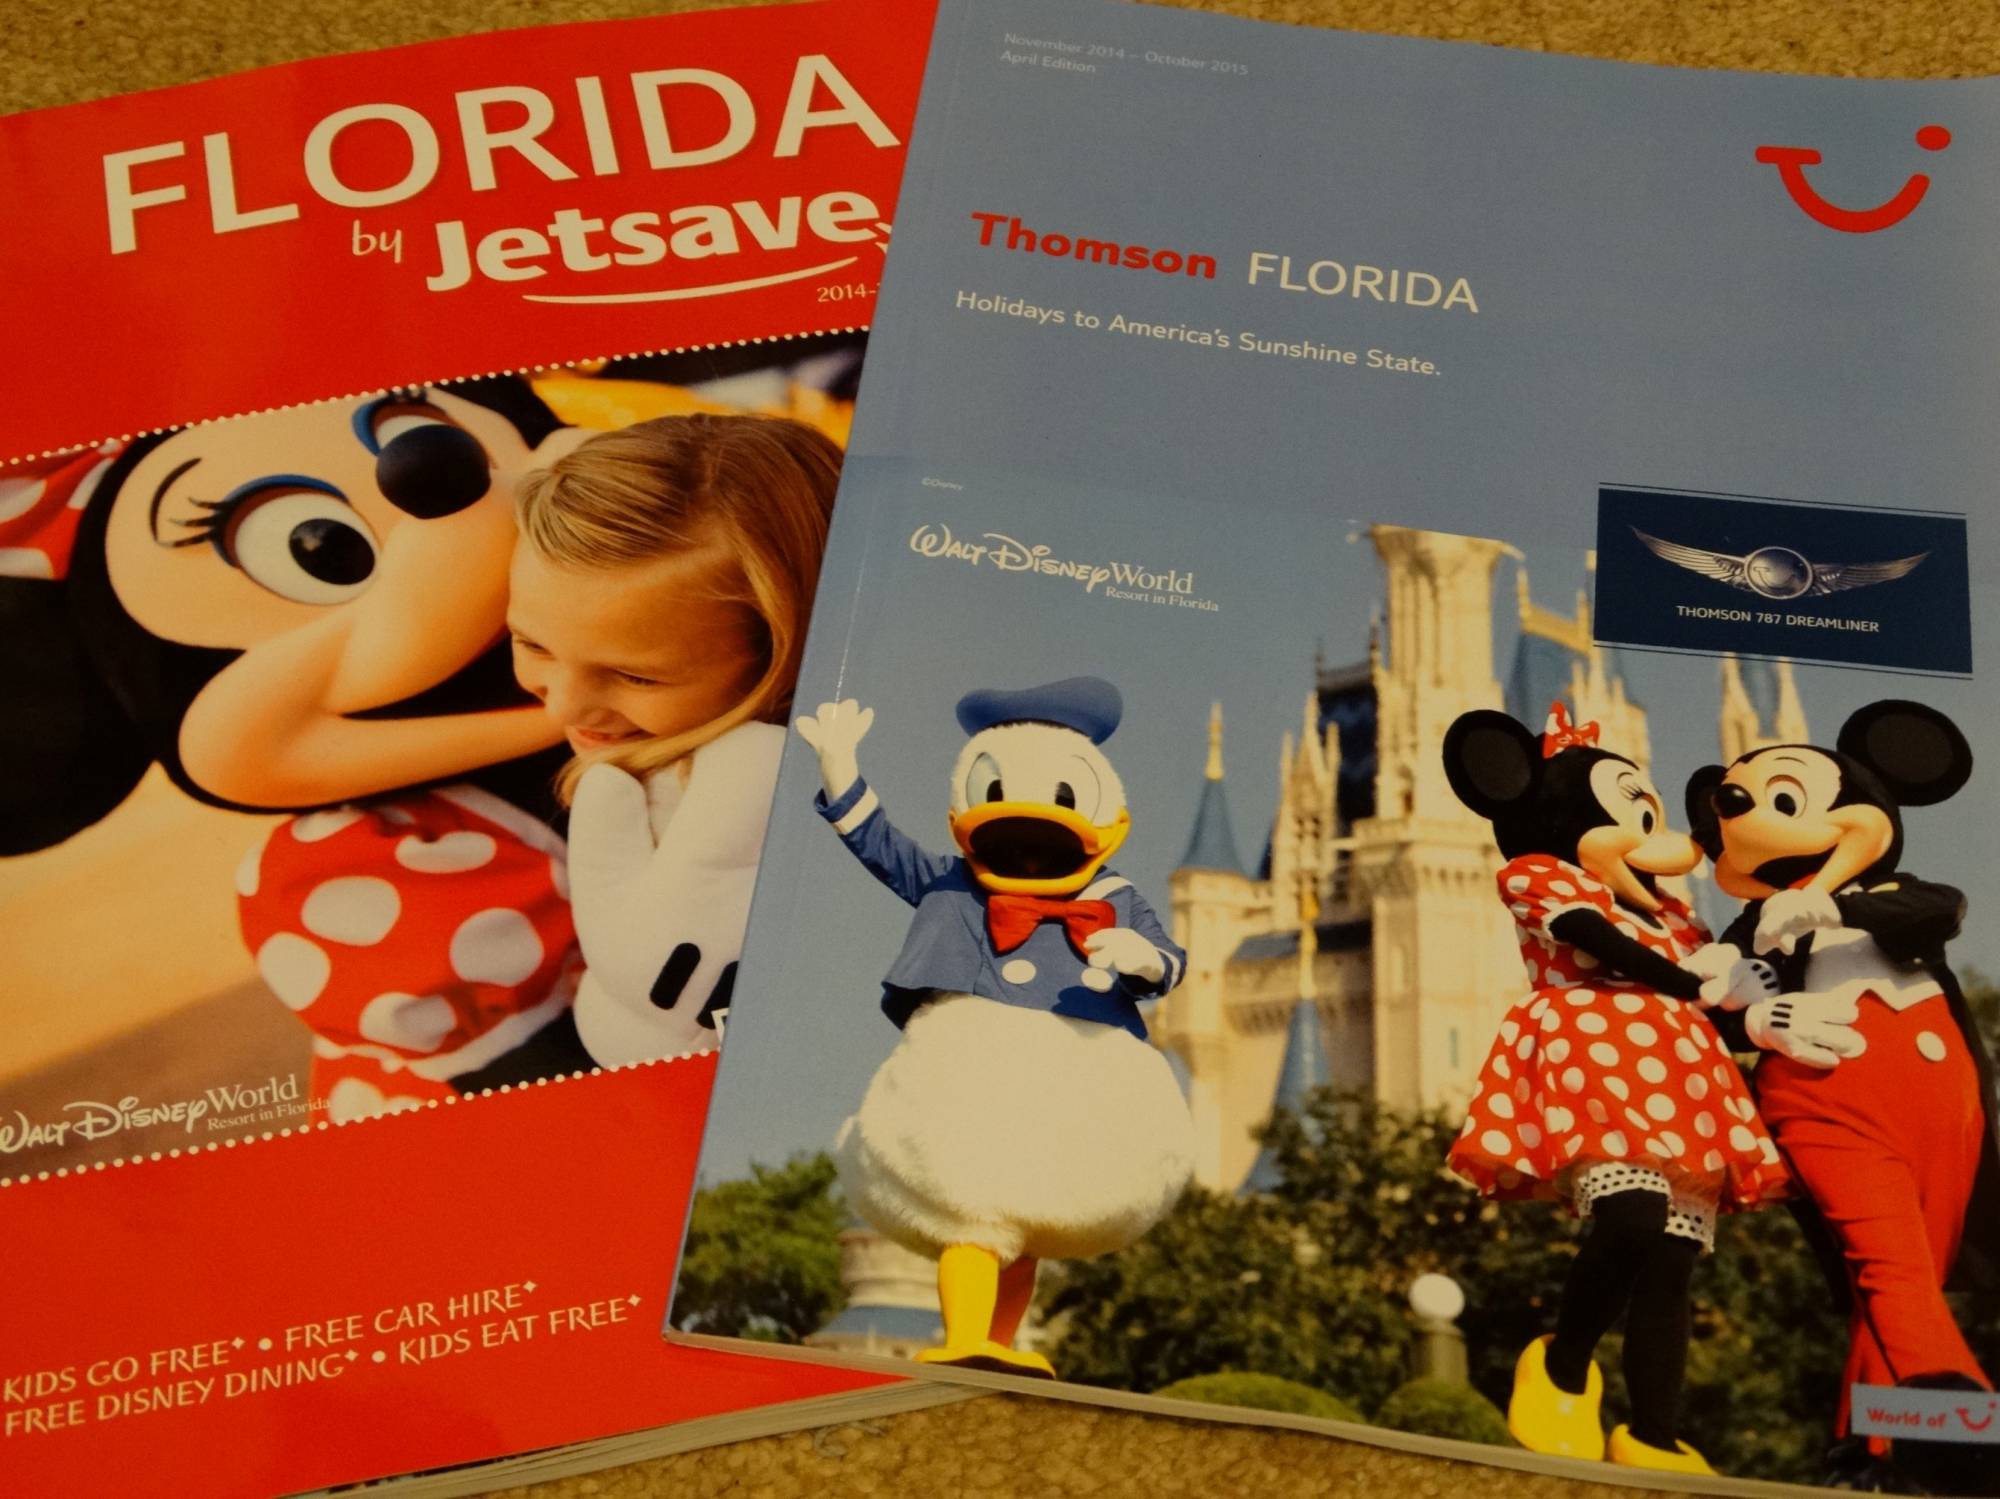 Jetsave and Thomson brochures